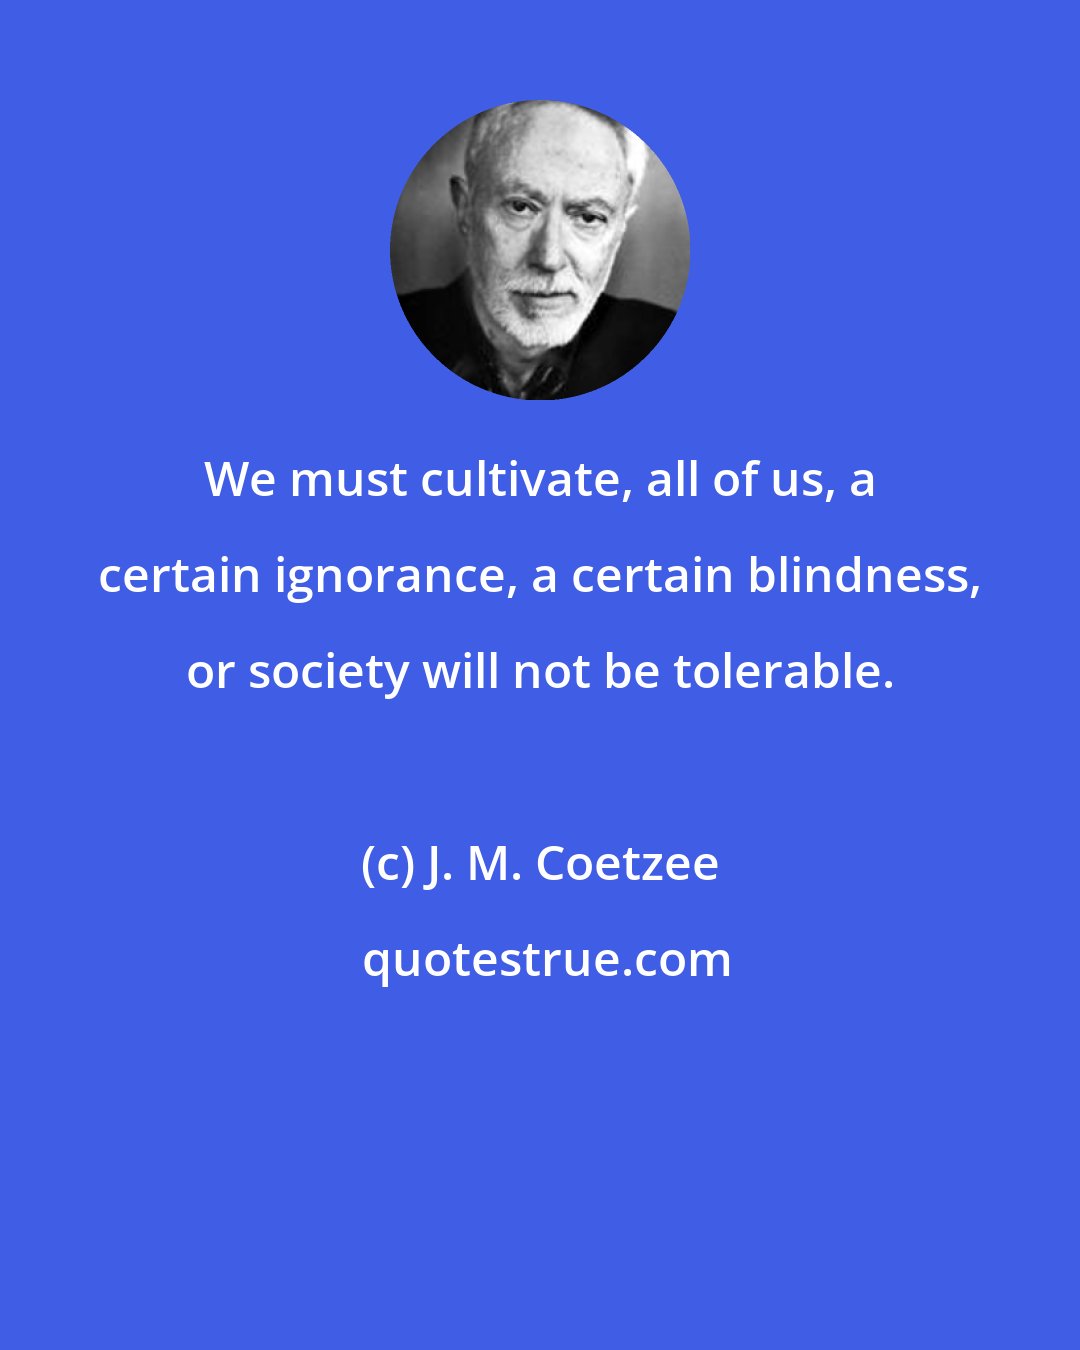 J. M. Coetzee: We must cultivate, all of us, a certain ignorance, a certain blindness, or society will not be tolerable.